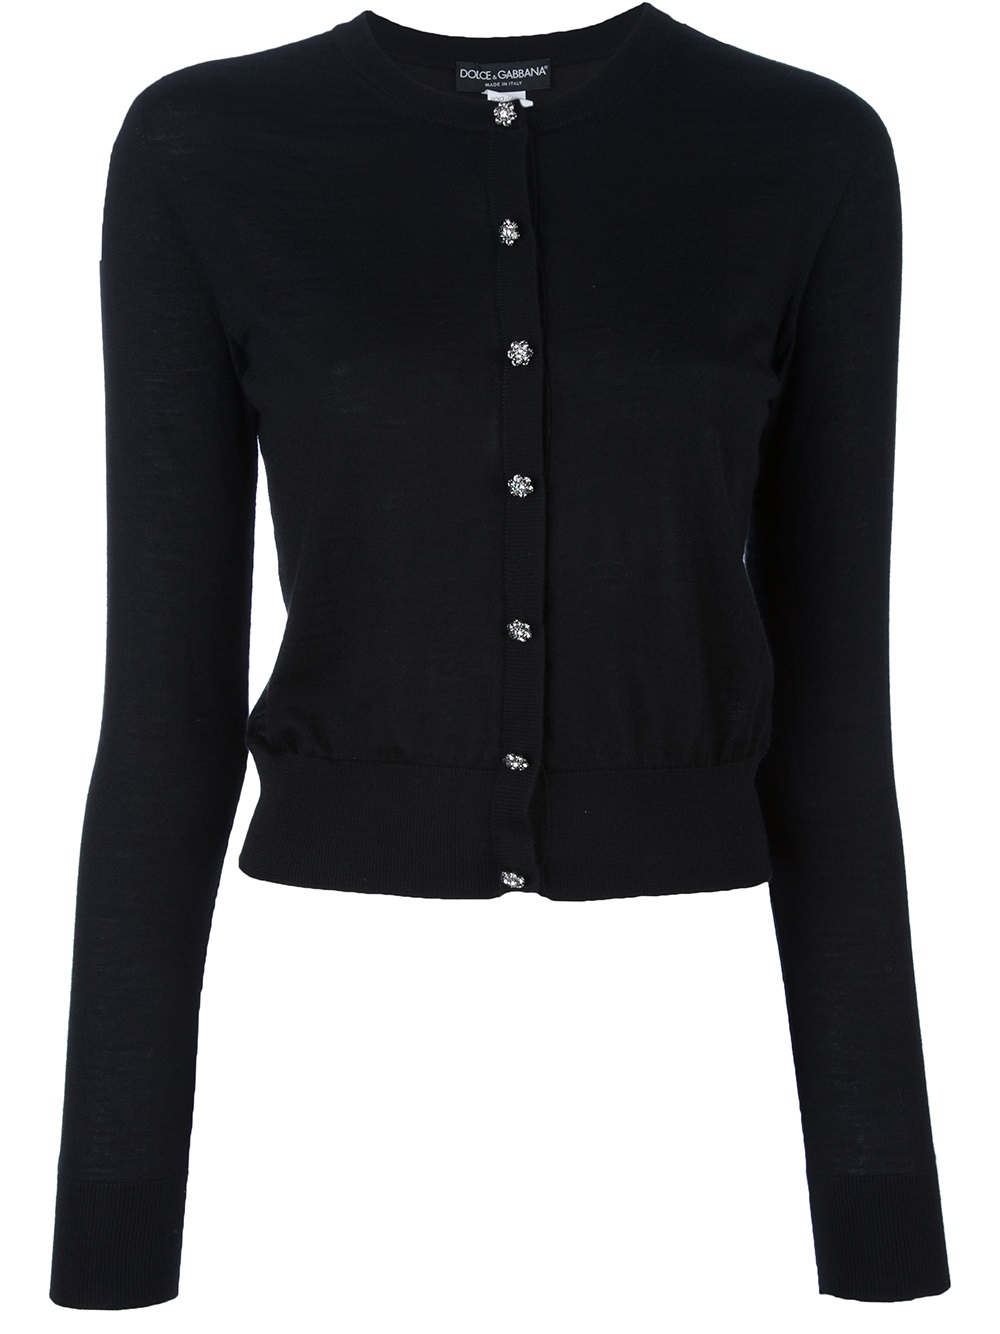 Dolce & gabbana Fitted Cardigan in Black | Lyst